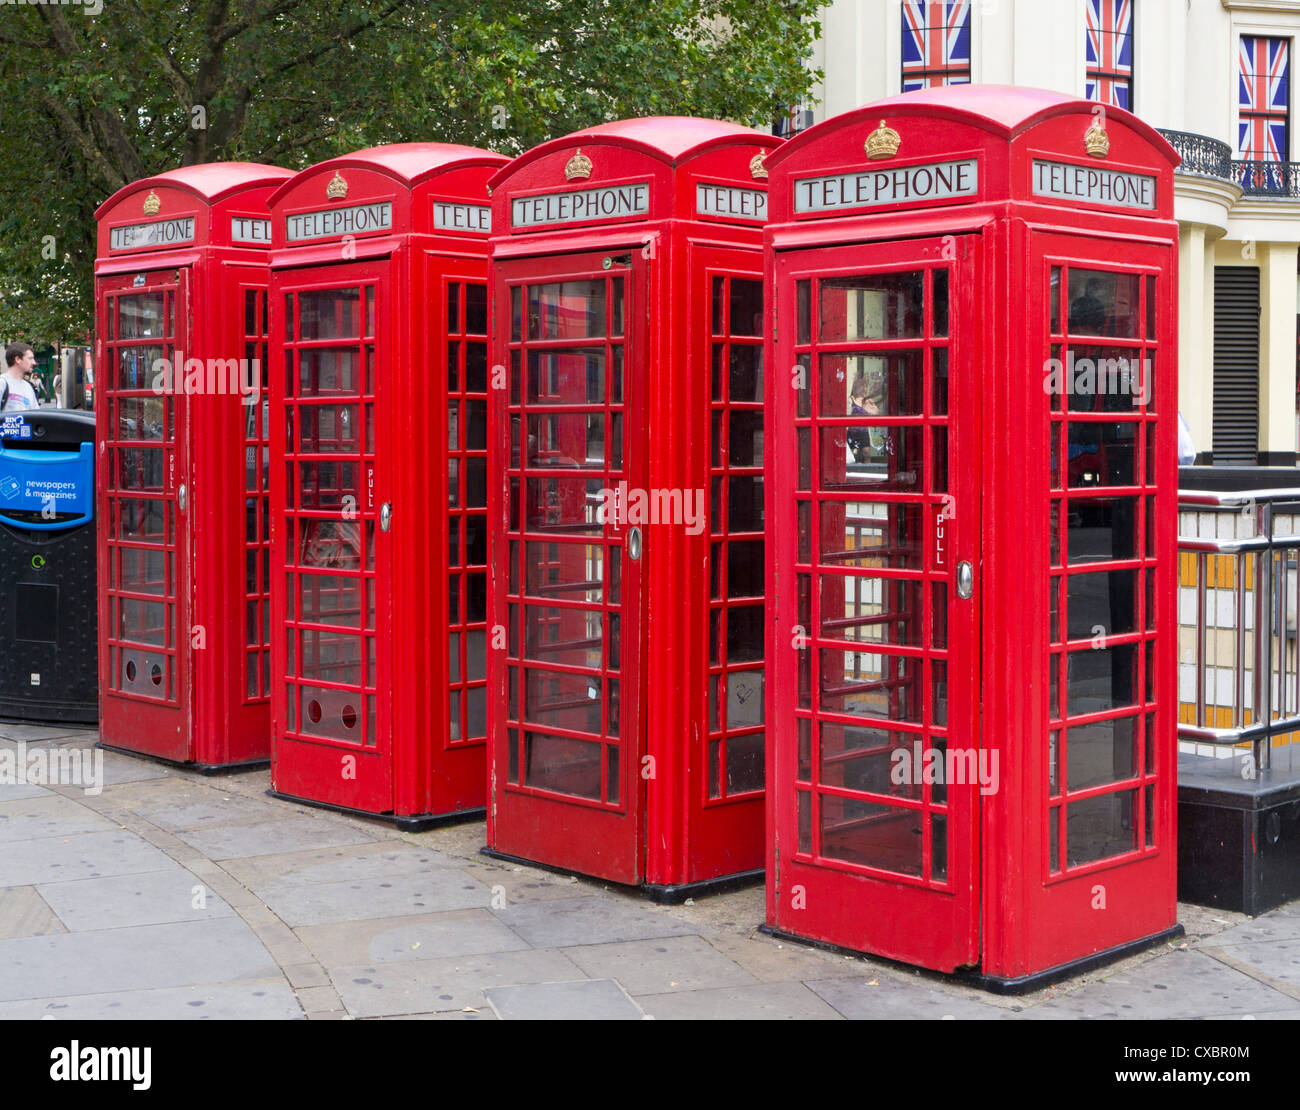 Row of four traditional red telephones boxes in Central London England UK GB EU Europe Stock Photo